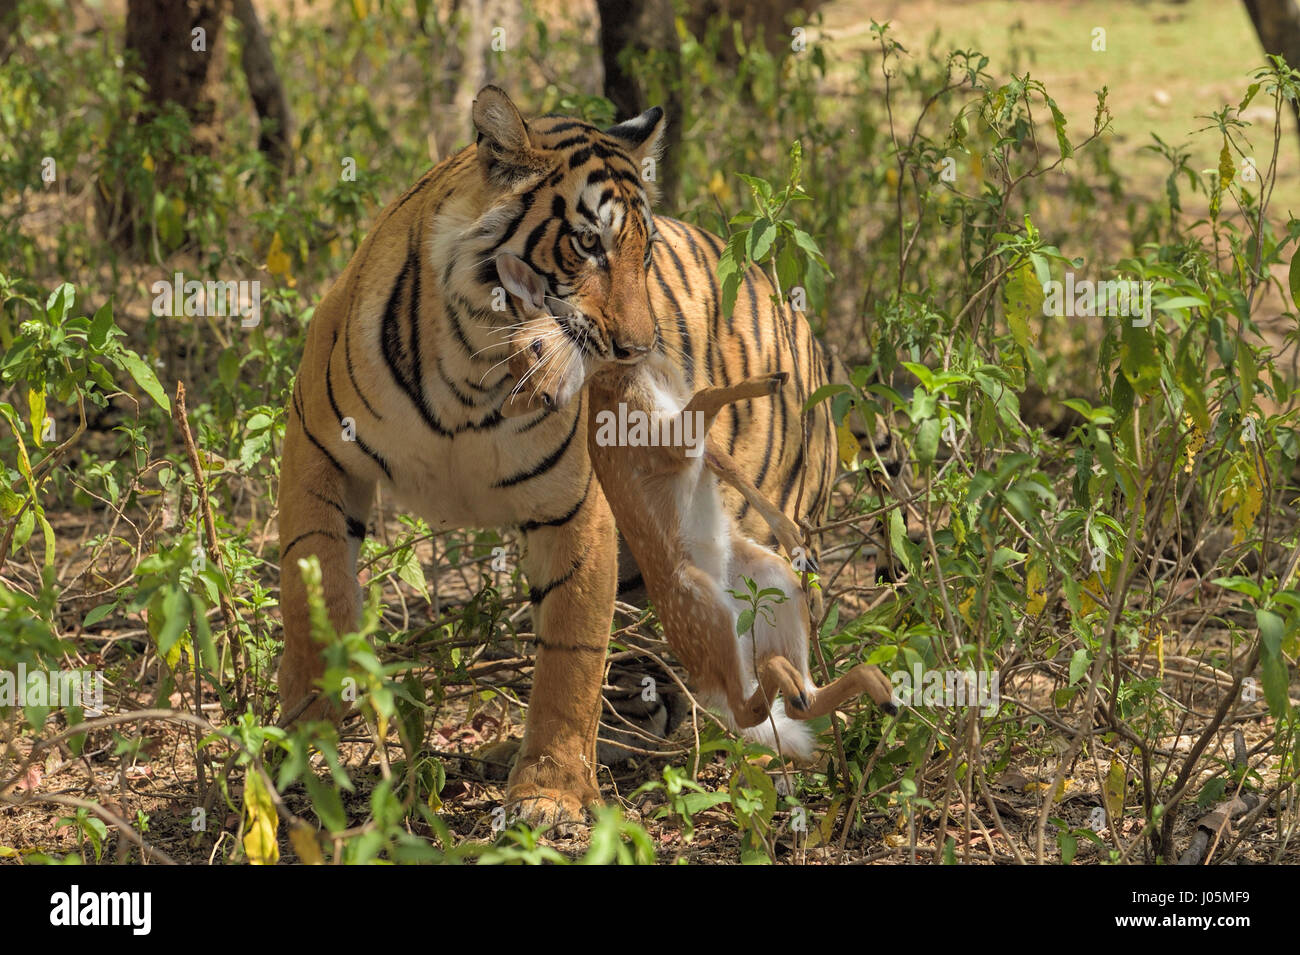 Close up of a Bengal tiger, carrying a dead Spotted or Axis deer calf in her mouth, in Ranthambhore tiger reserve, India Stock Photo